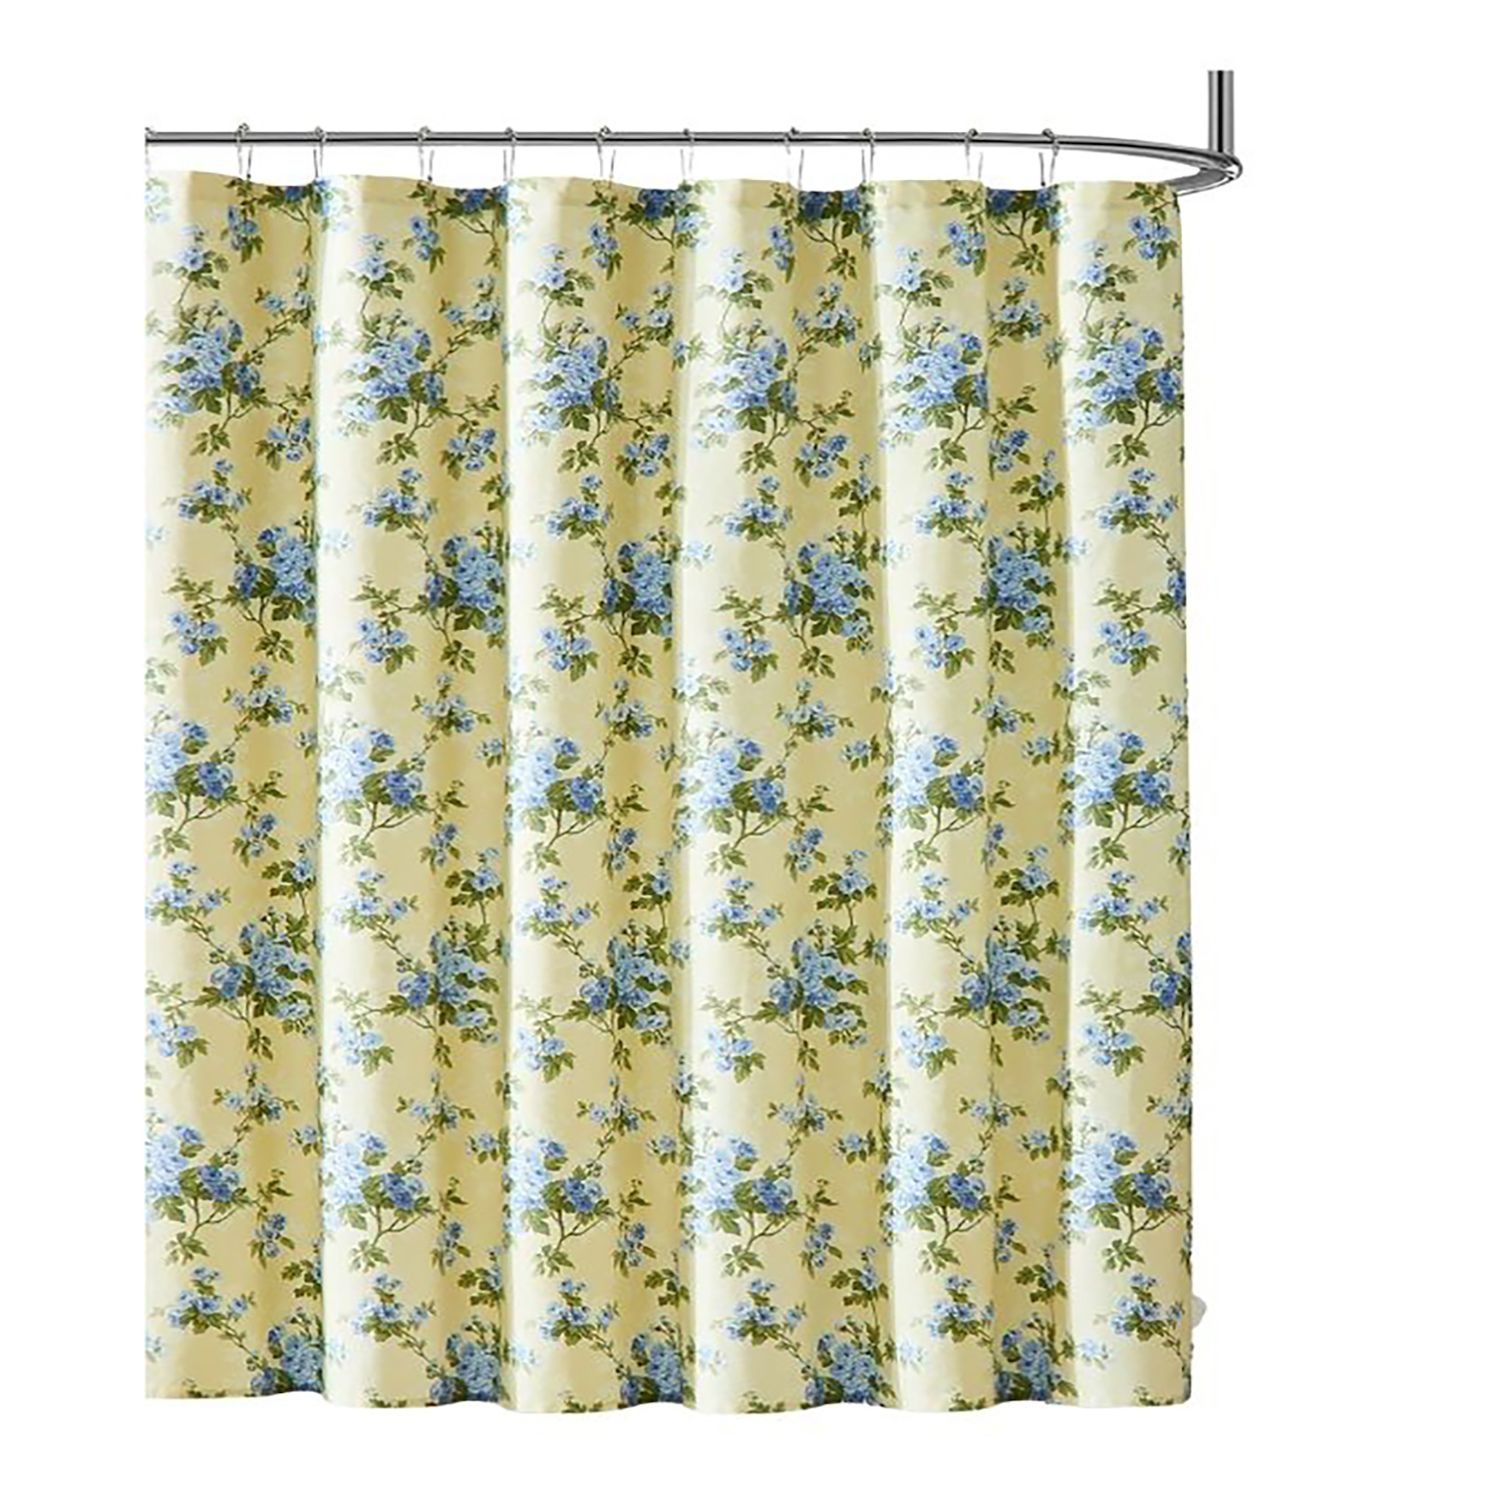 Image for Laura Ashley Cassidy Shower Curtain at Kohl's.